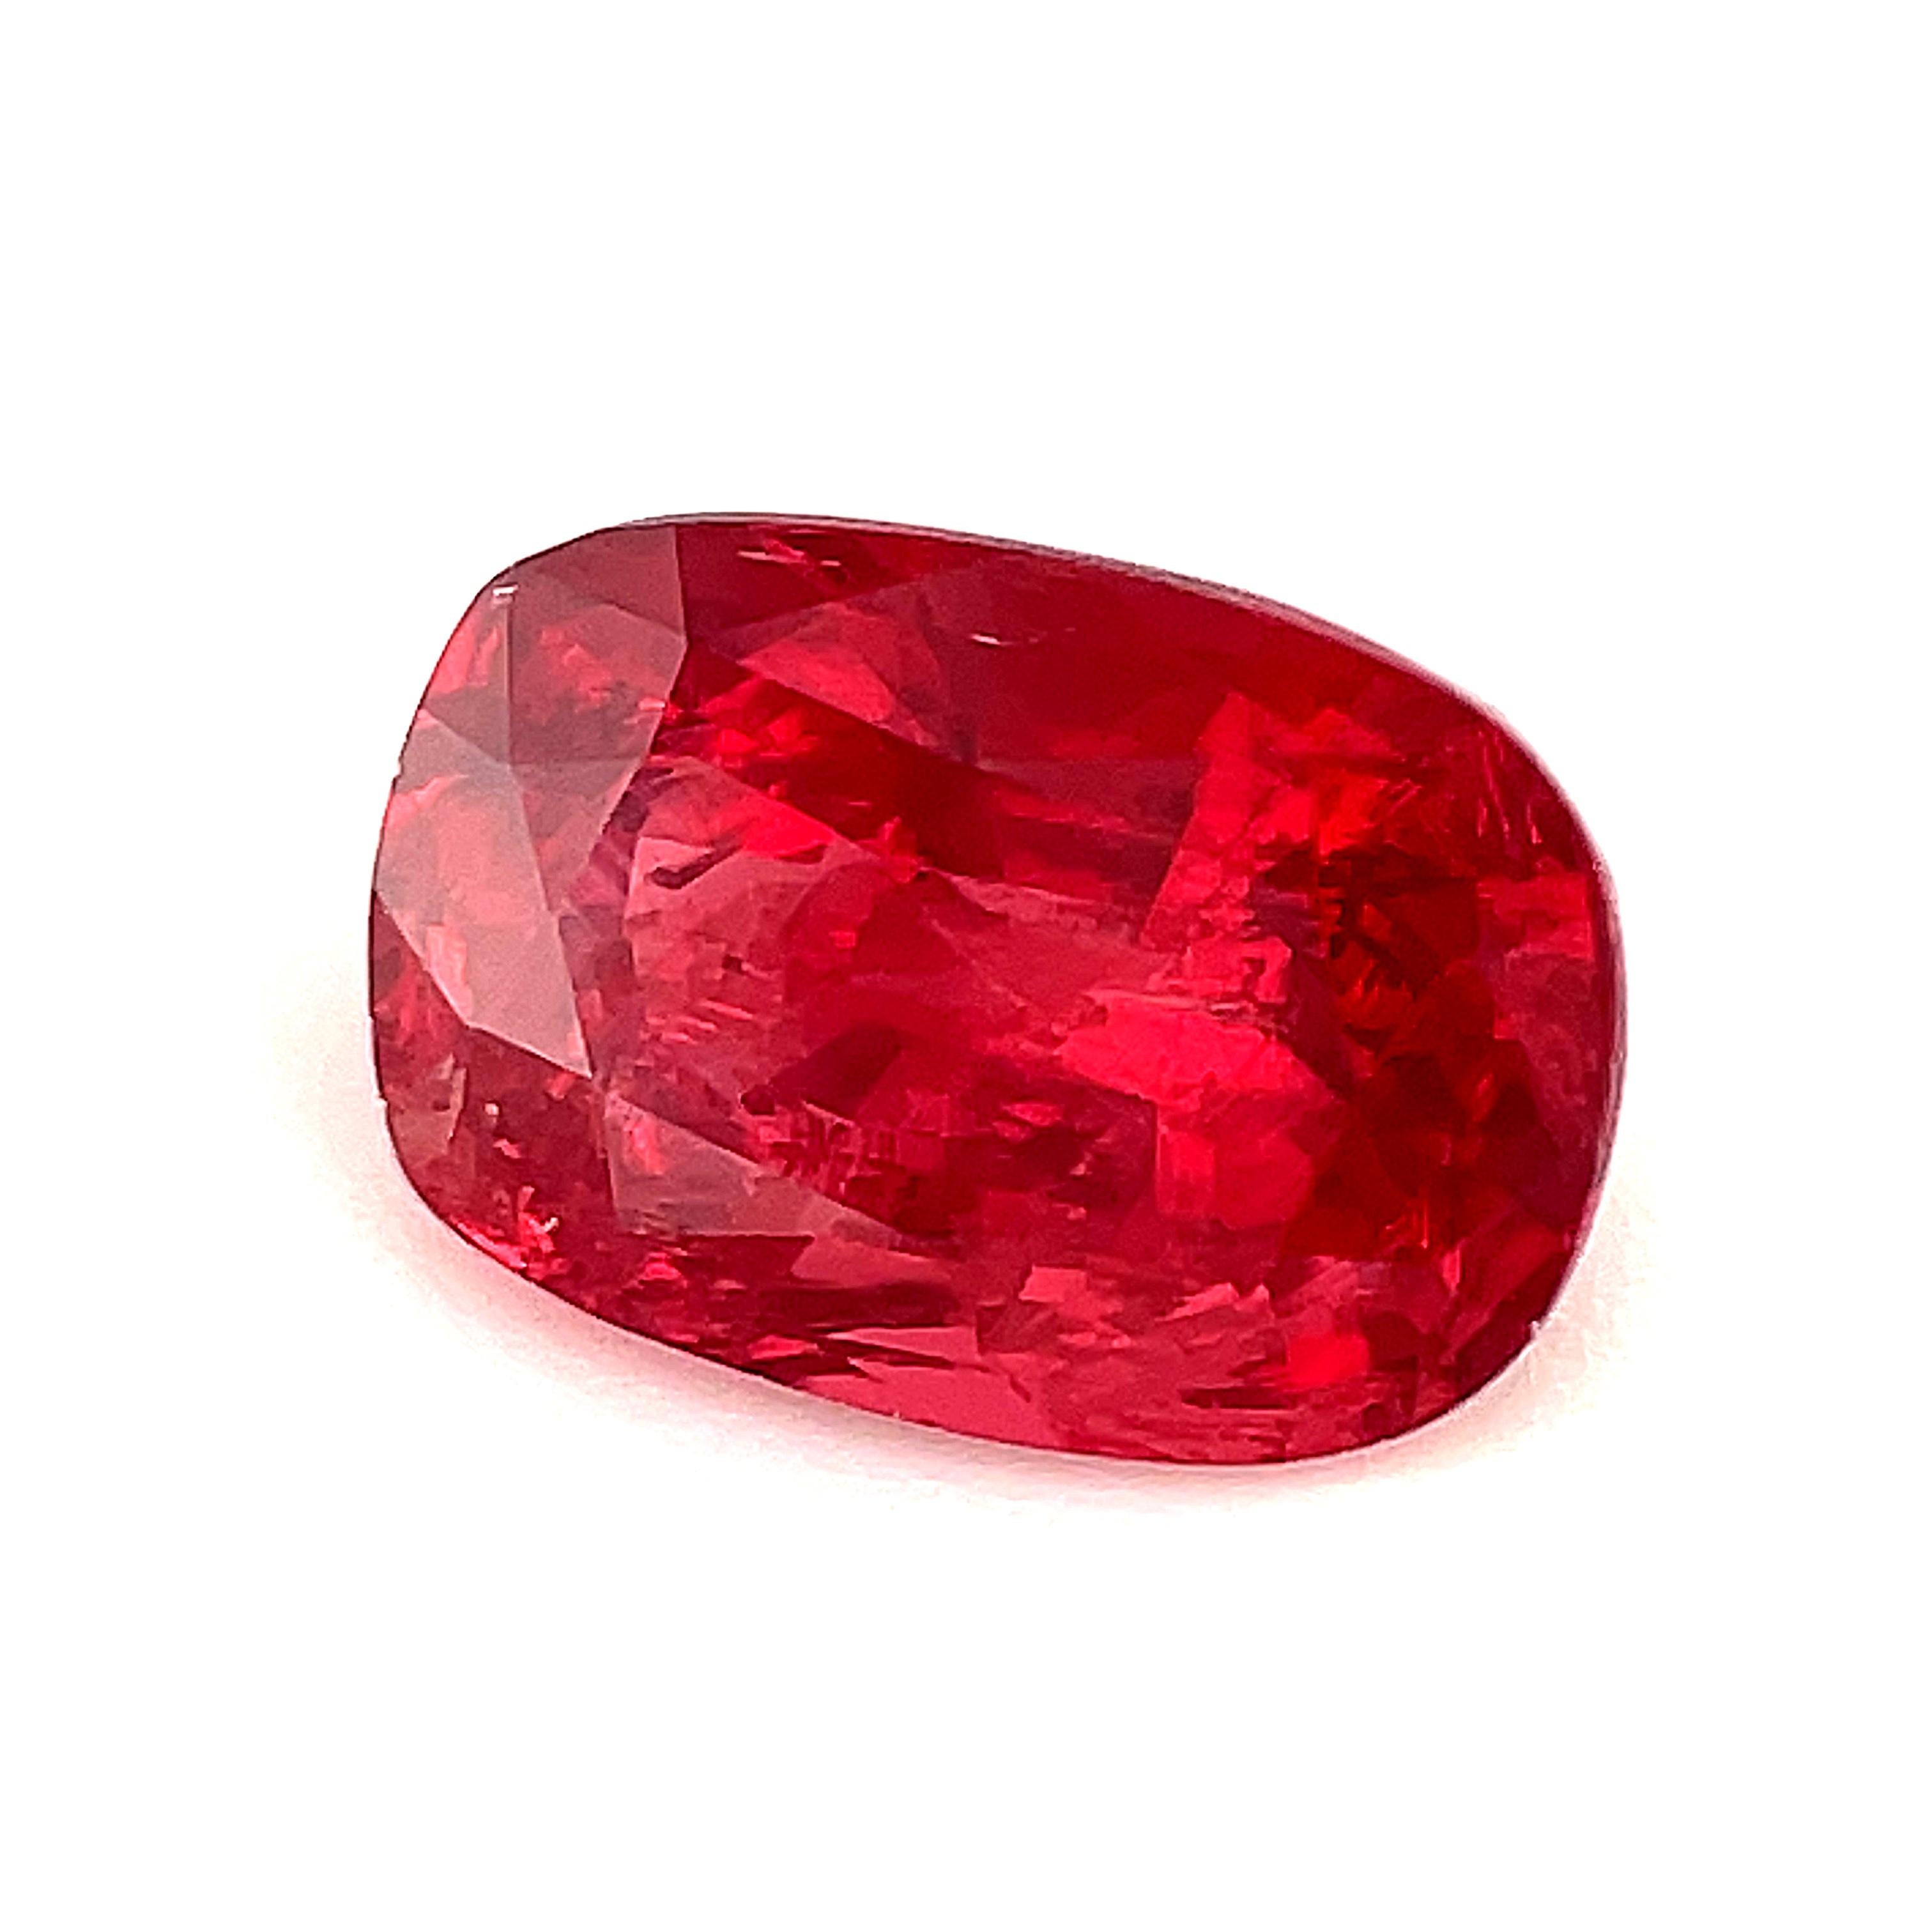 Cushion Cut 1.48 Carat Cushion Shaped Loose Unset Unmounted Red Spinel Gemstone For Sale